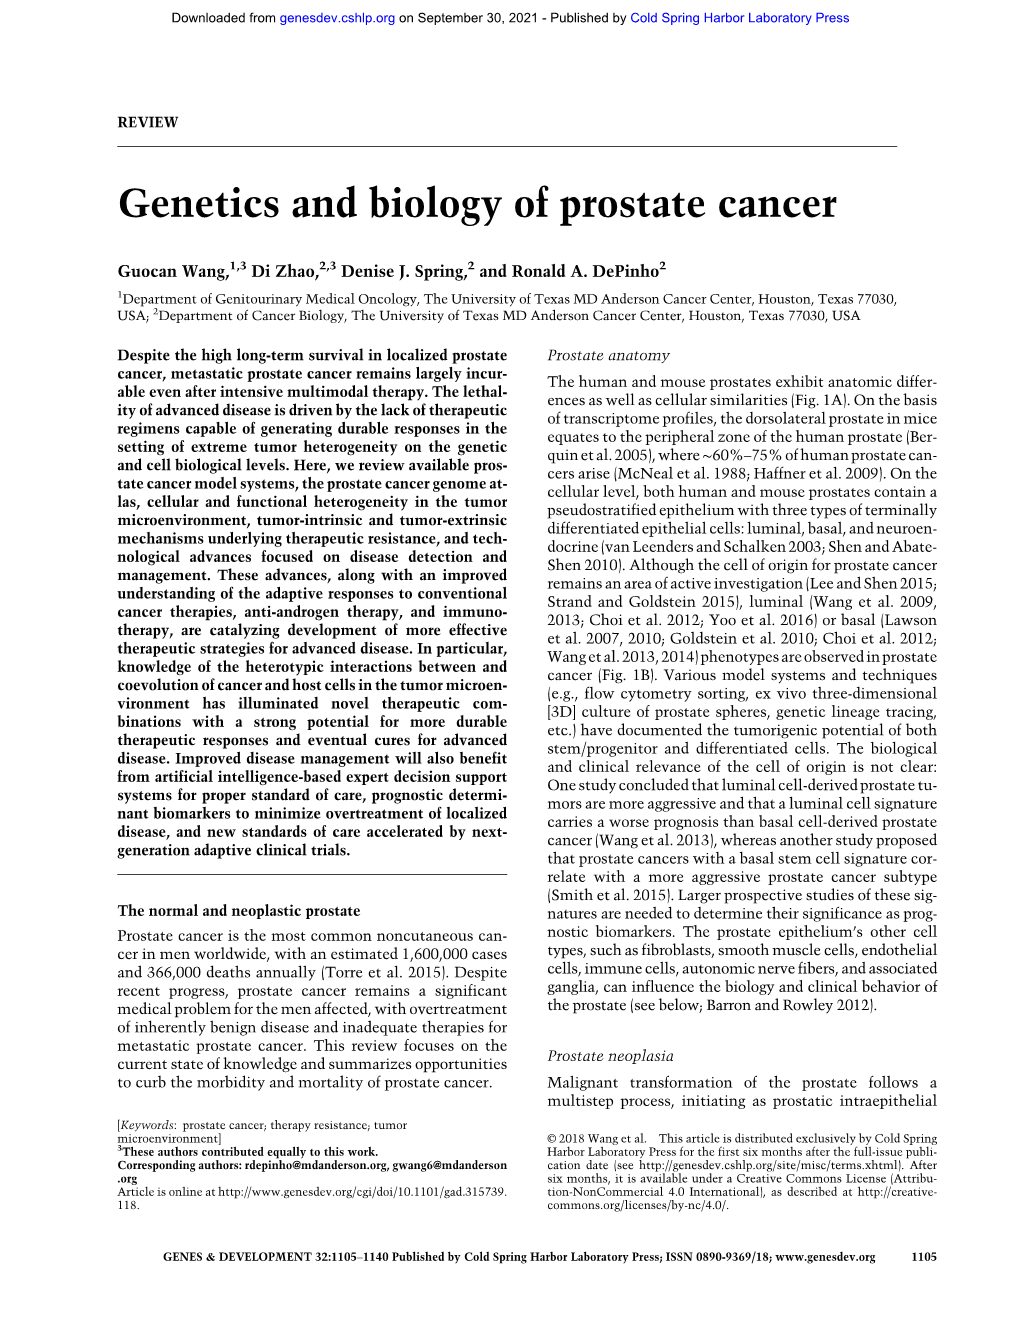 Genetics and Biology of Prostate Cancer